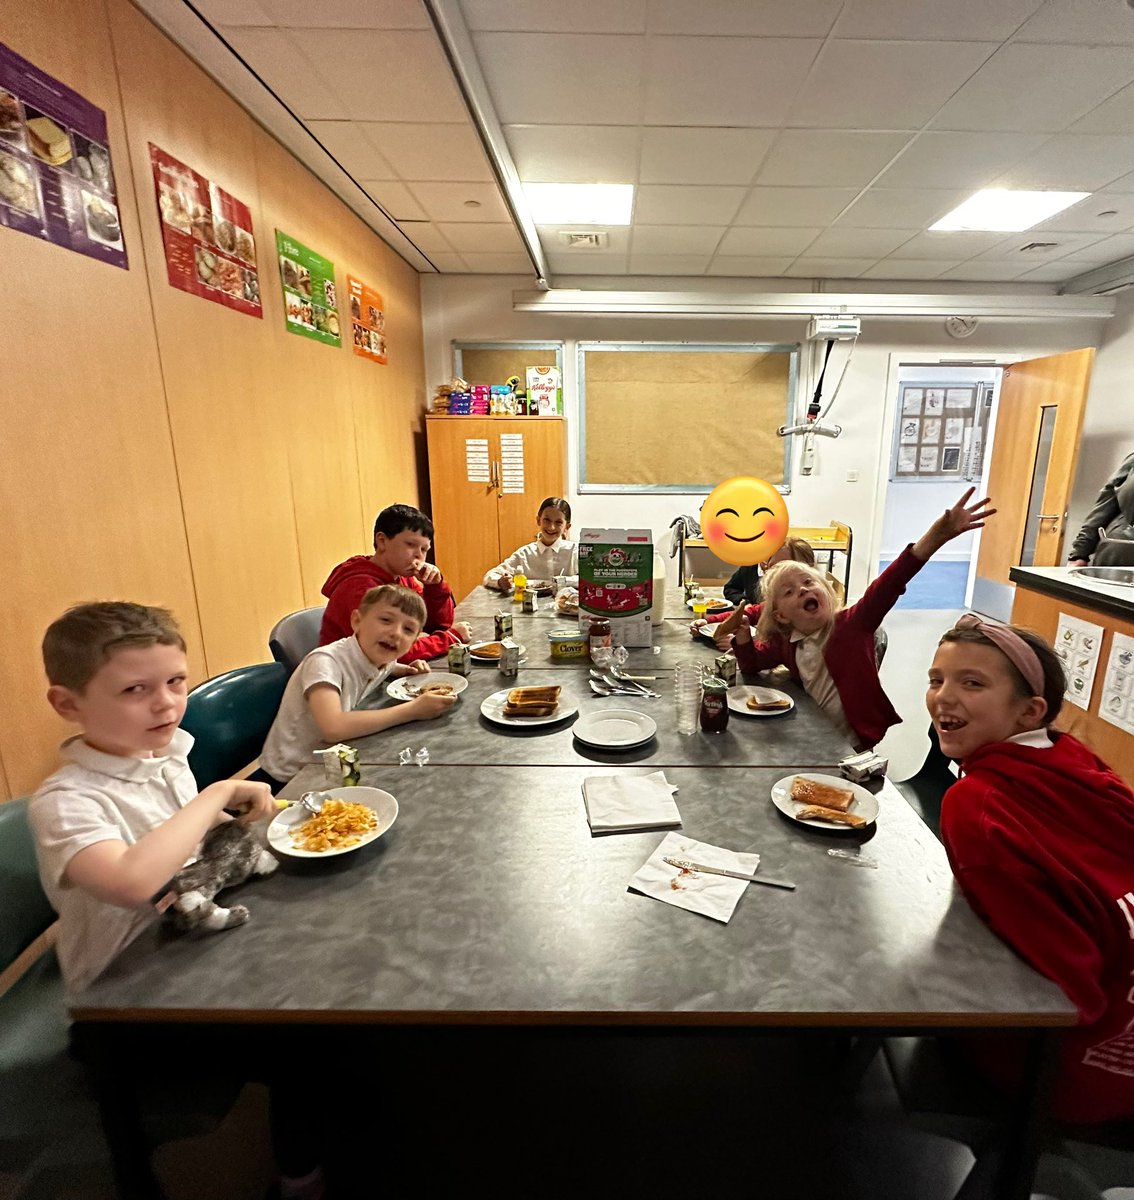 The first morning of our Greggs Smart Start Breakfast was a success! @GreggsOfficial #readyfortomorrow